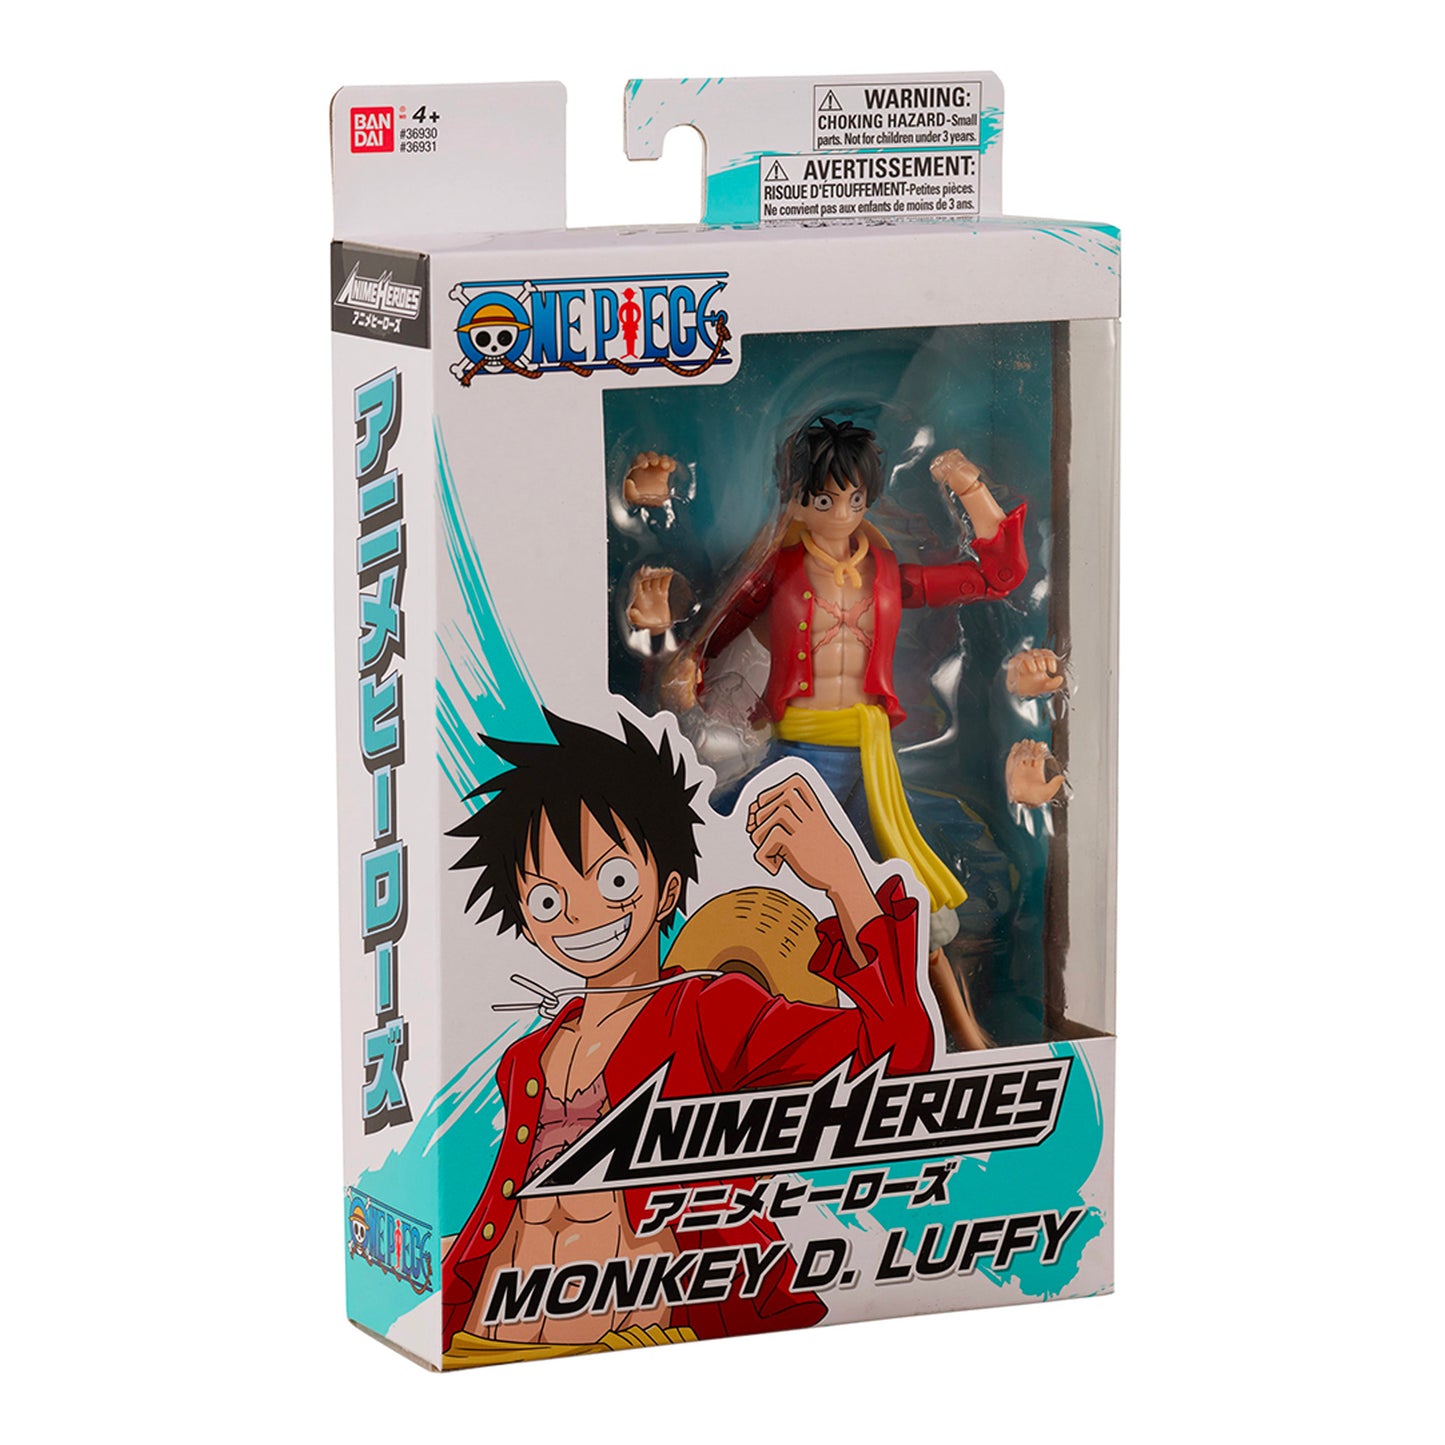 BandaI: Anime Heroes - One Piece - Monkey D. Luffy 6.5" Tall Action Figure